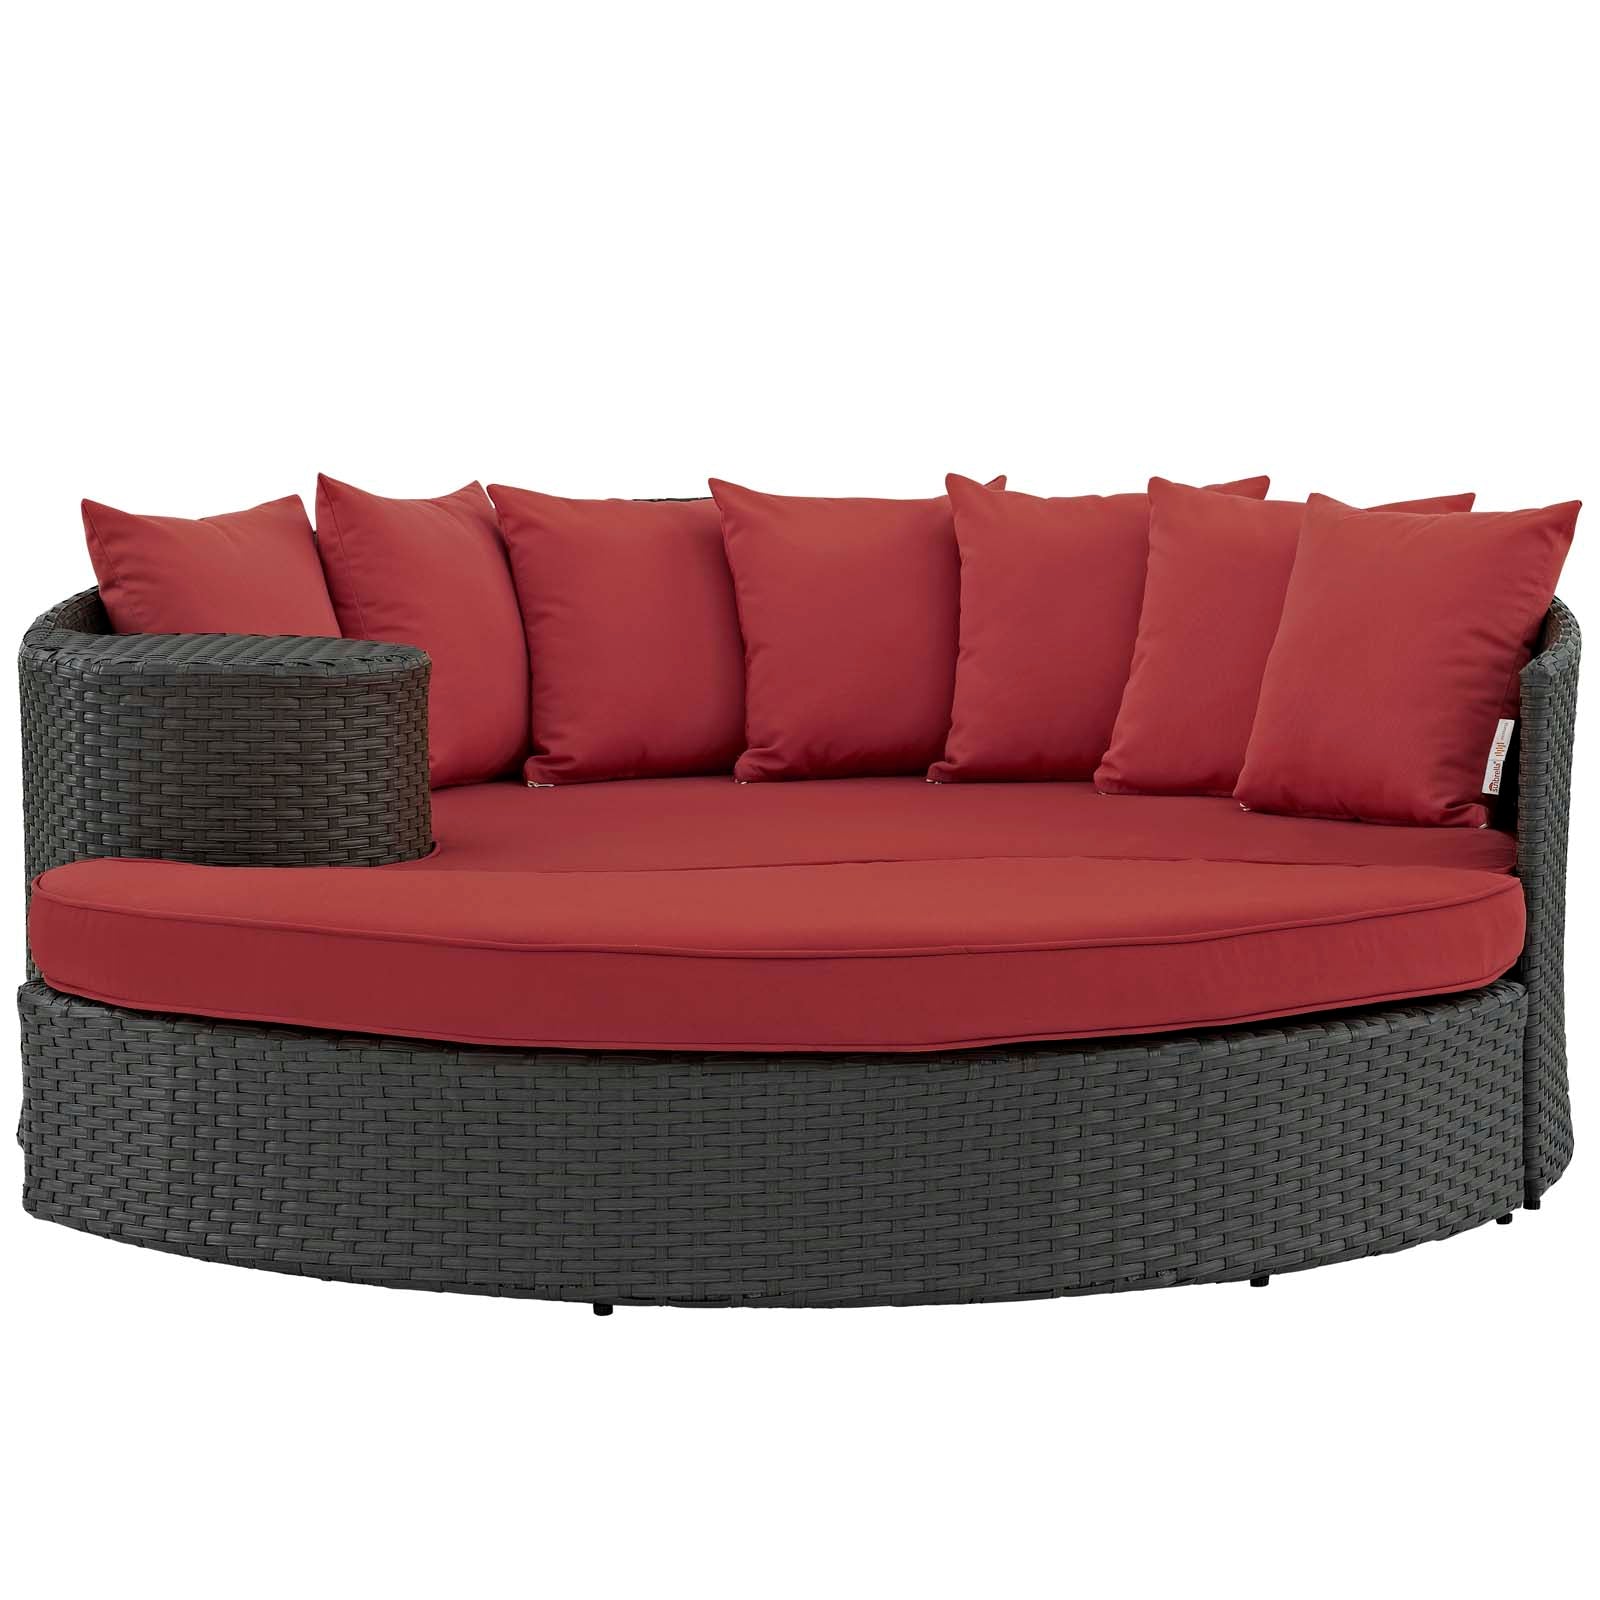 Sojourn Outdoor Patio Sunbrella Daybed Canvas Red 71"W